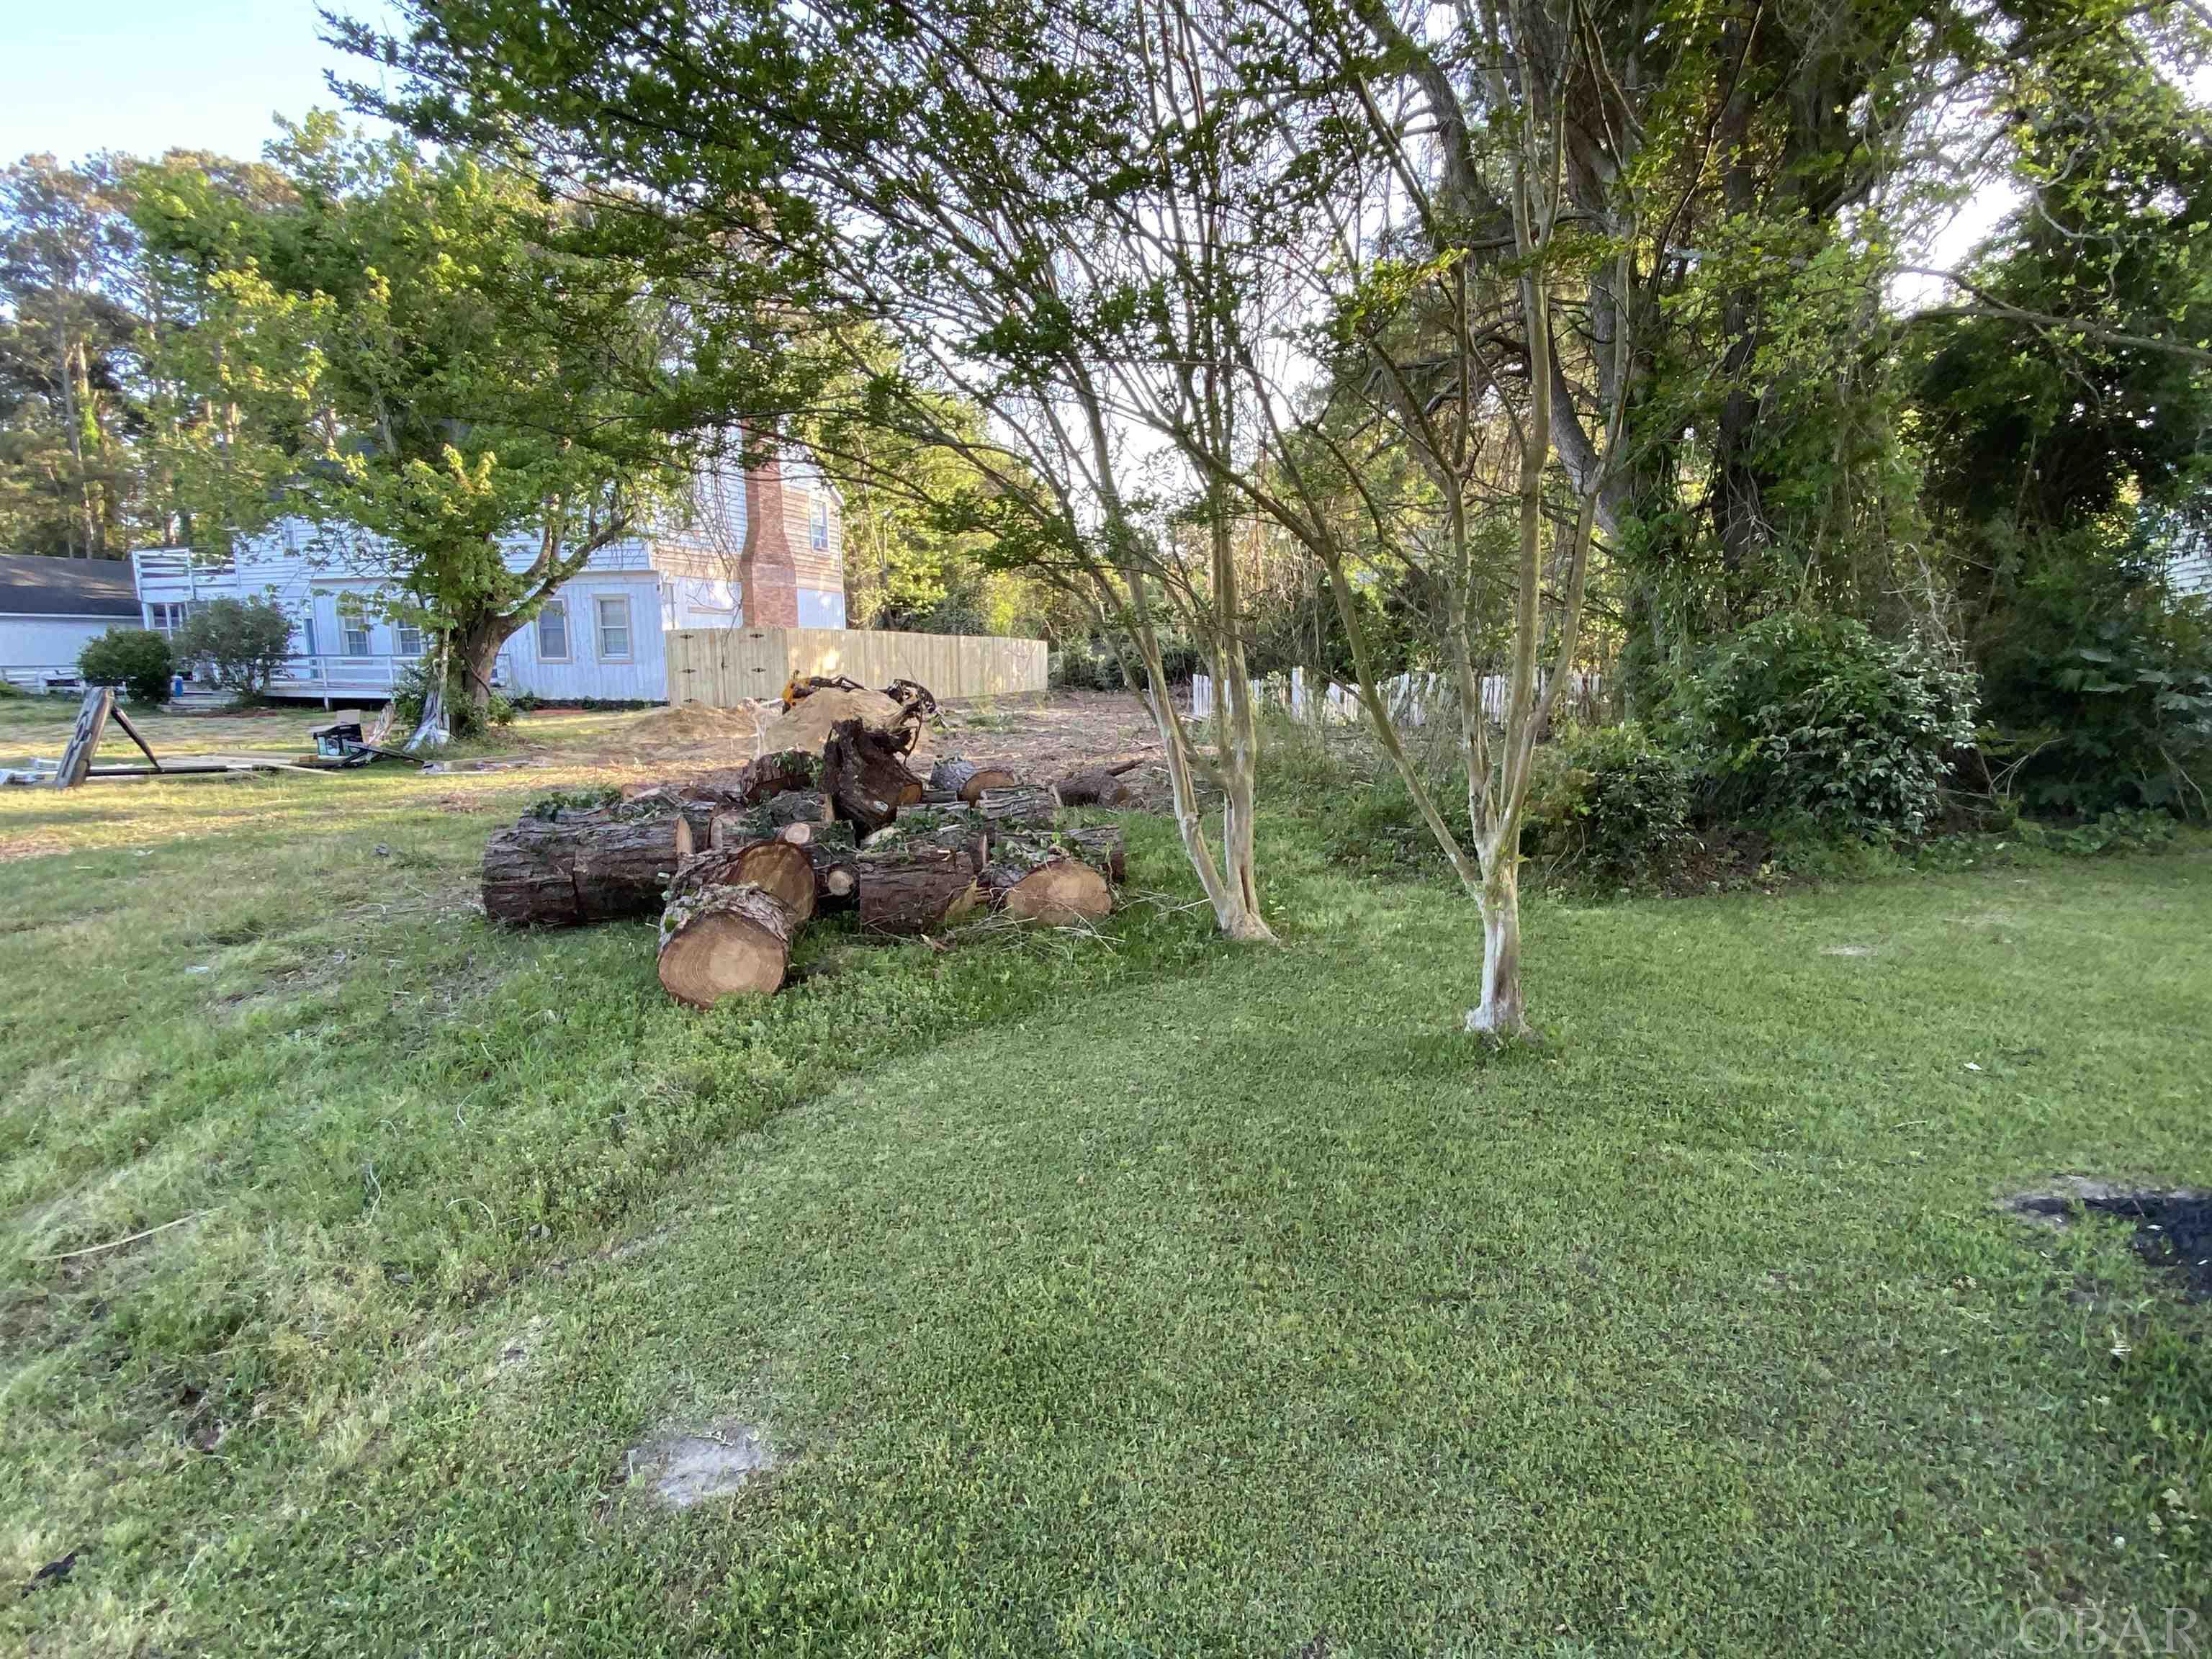 Rare Opportunity for 9400 Sq Foot Residential Lot in First Flight Village! Close to Shopping and Restaurants, can walk to sound and beach.  Lot has had some trees removed and stumps grinded, Owner will consider Owner Financing.  Owner is a licensed real estate agent